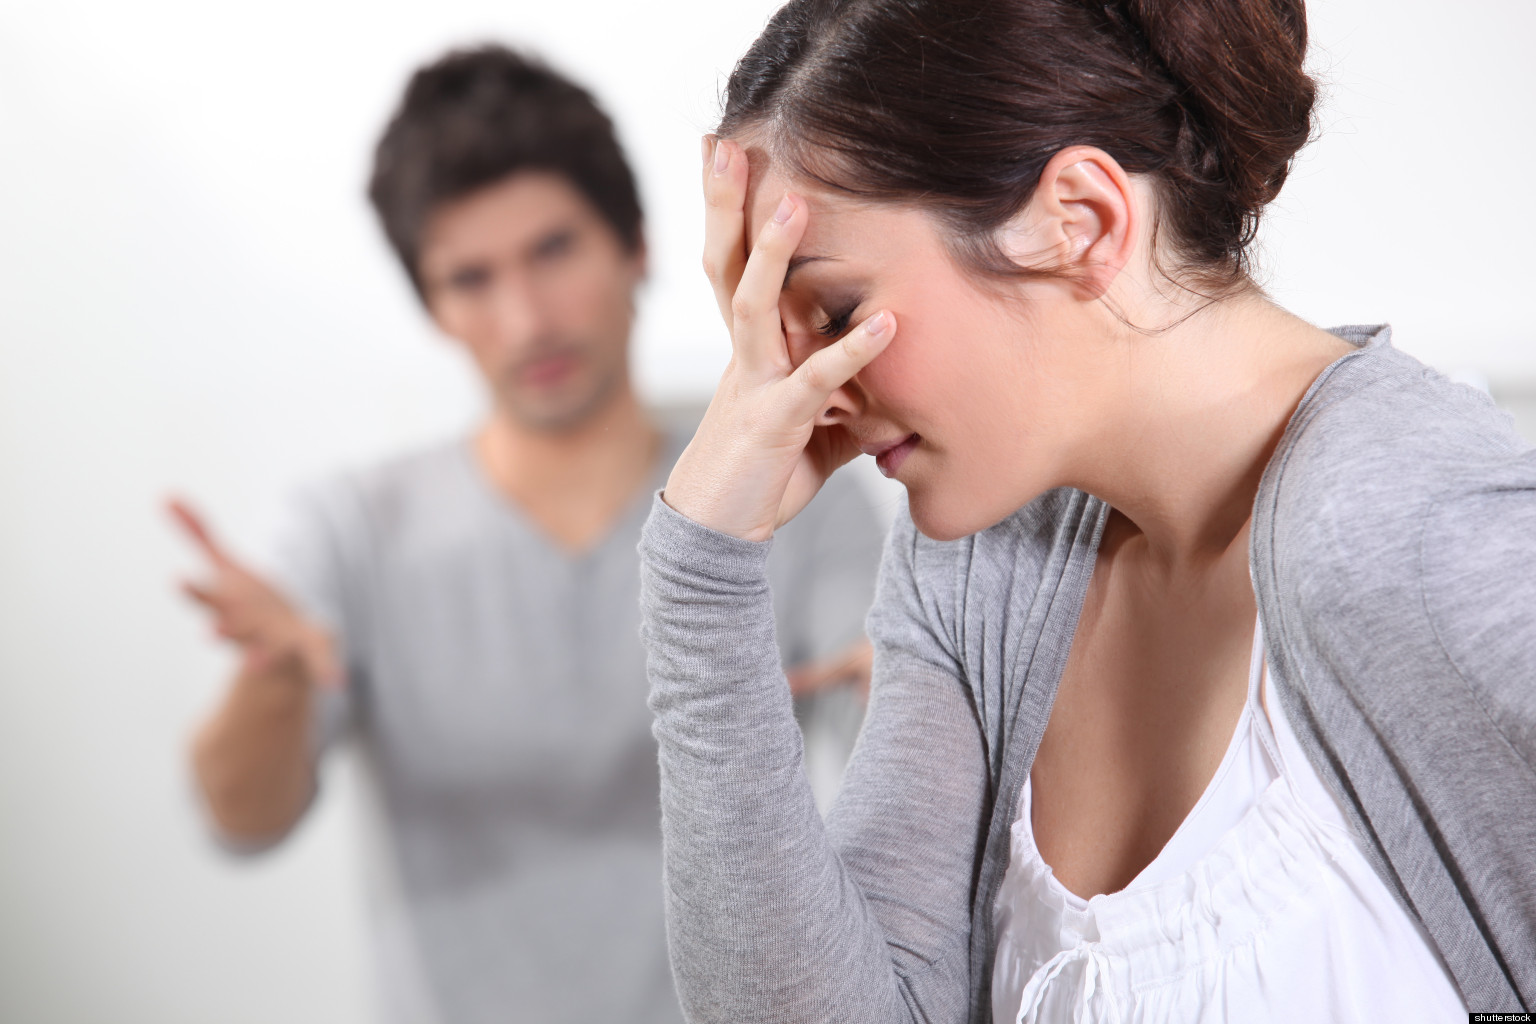 For Divorcing Women In Abusive Relationships, Knowledge Is Power | HuffPost